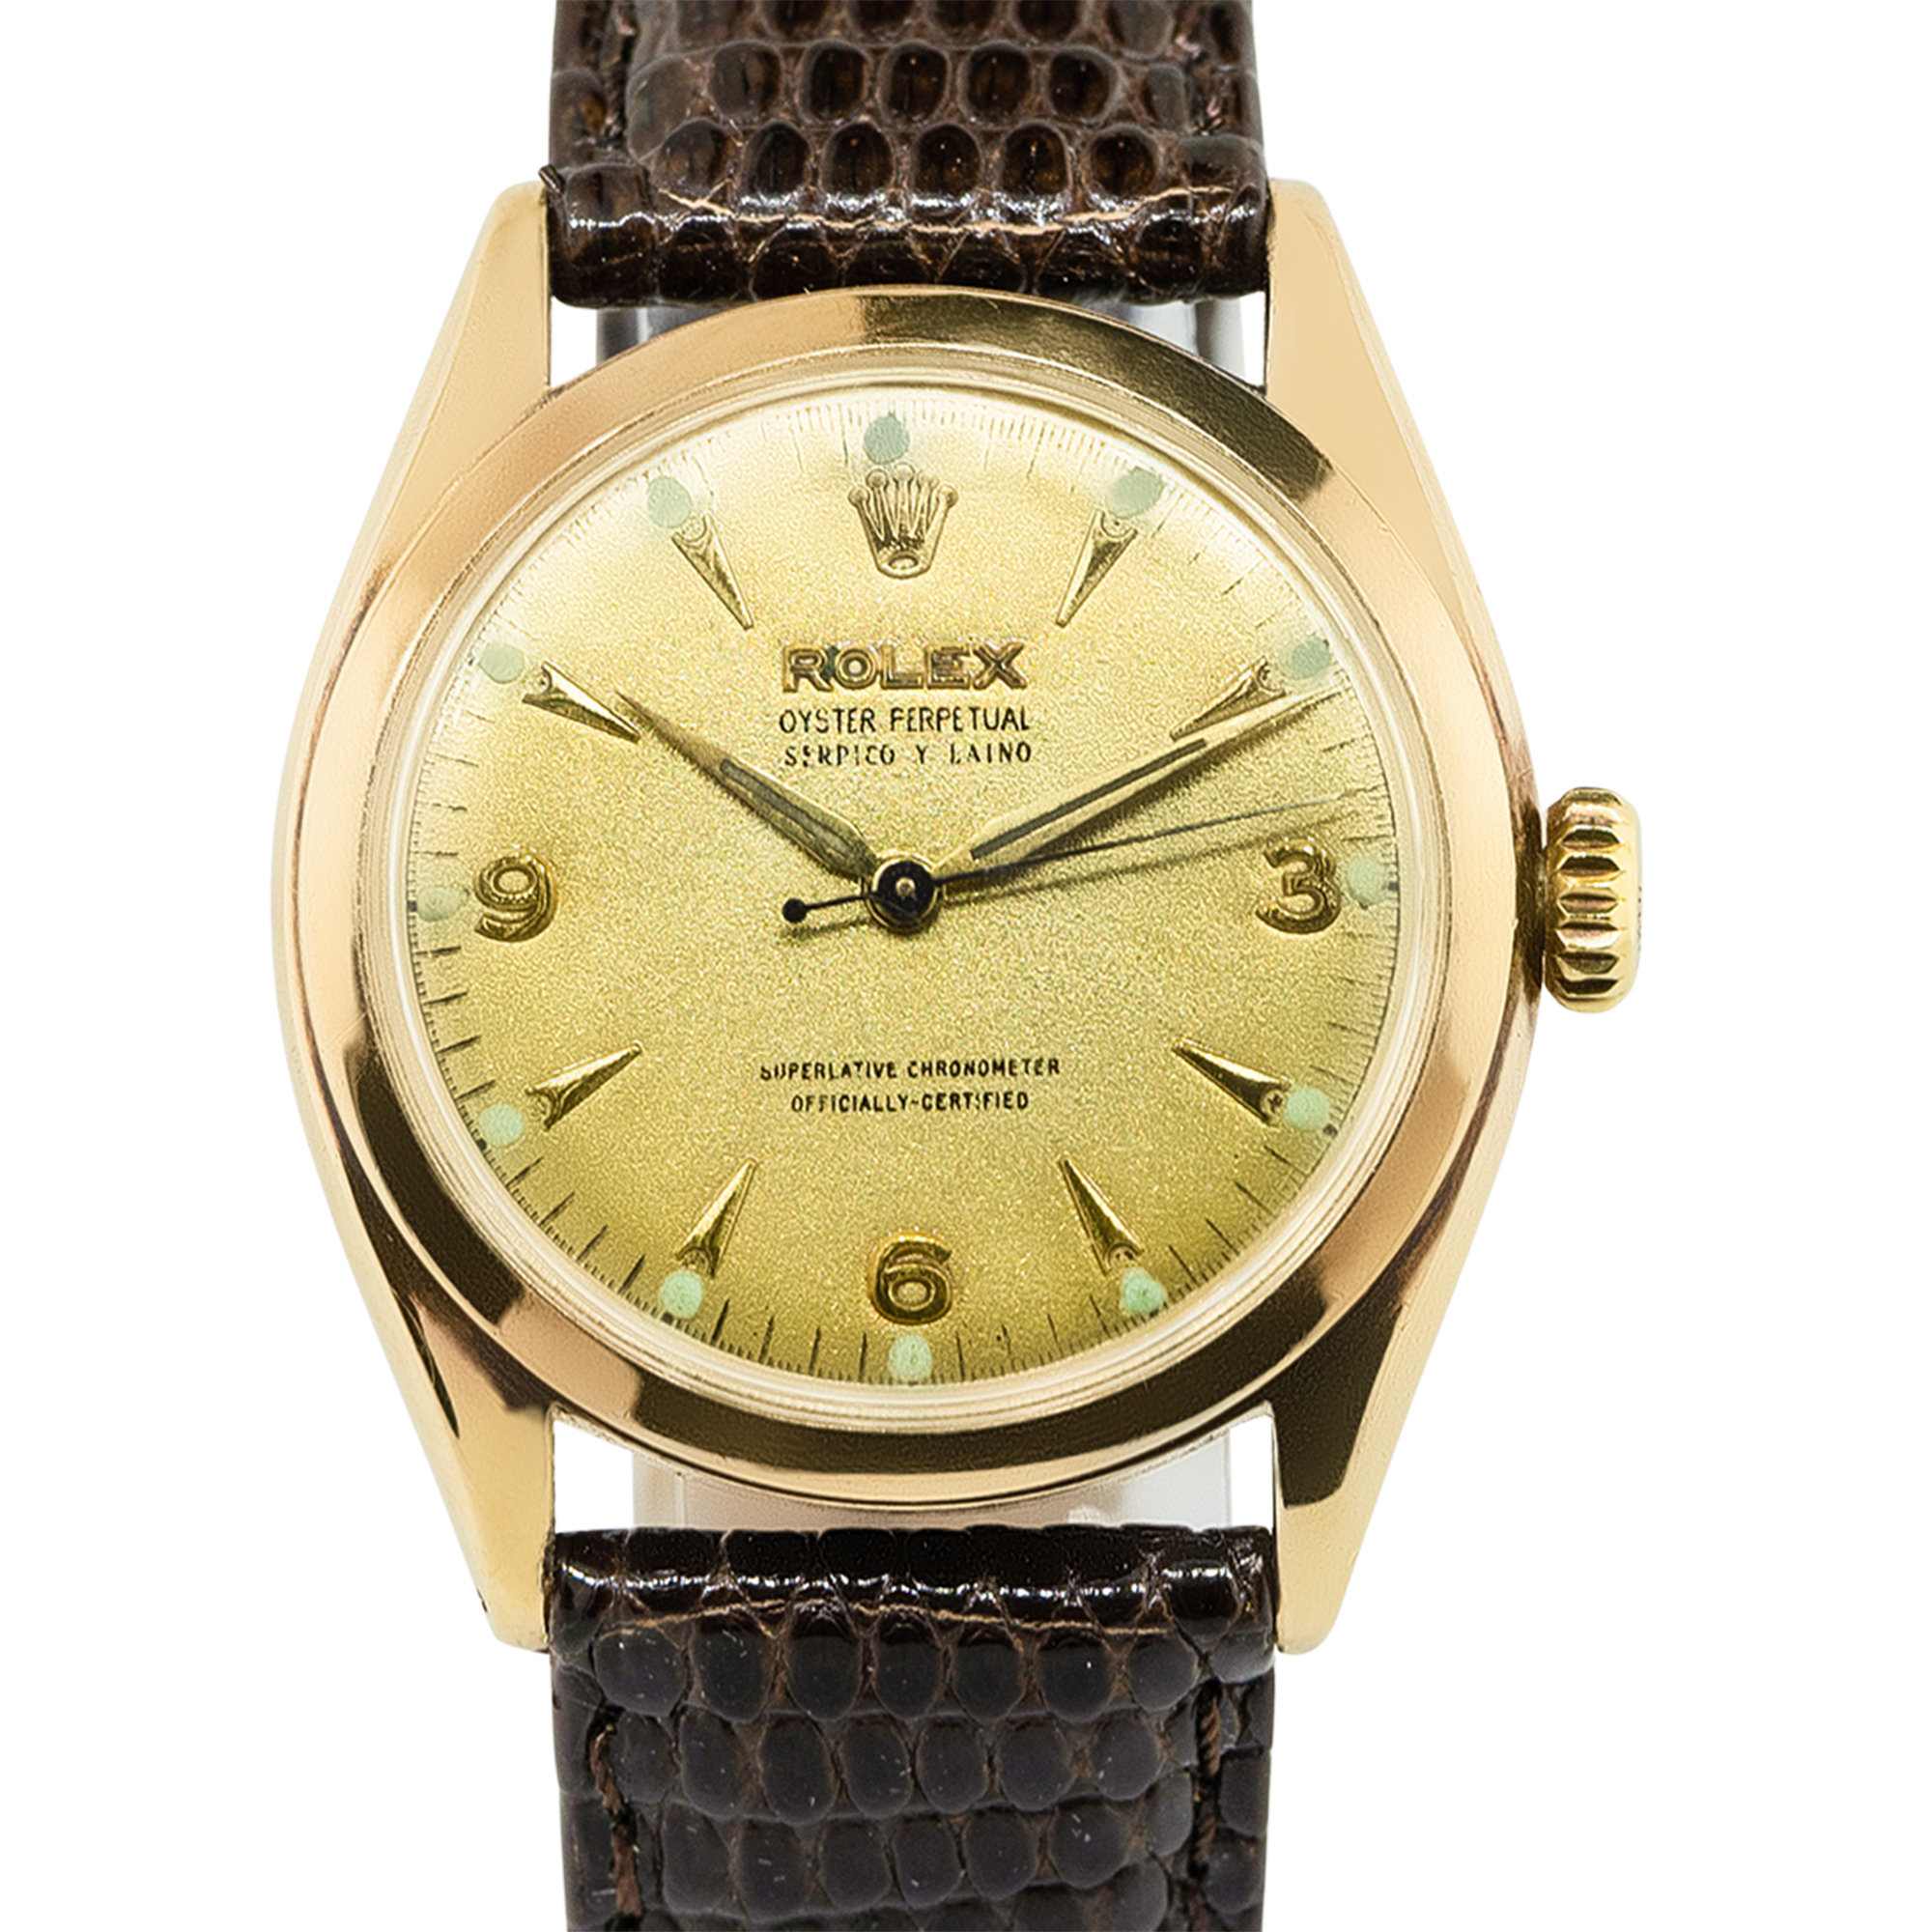 Vintage Rolex 6084 14k Yellow Gold Champagne Dial